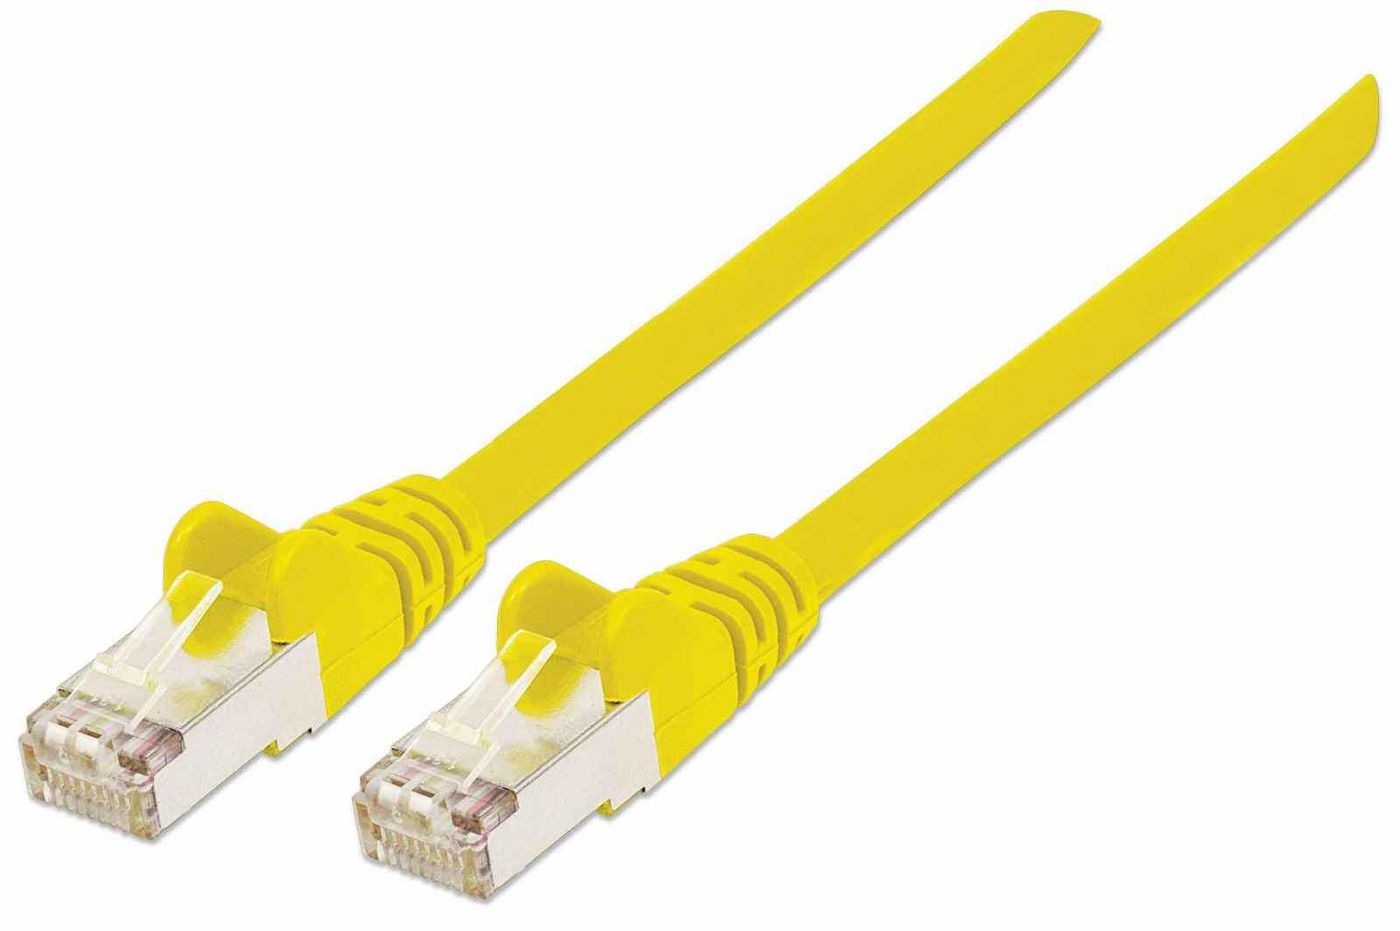 Intellinet 740777 High Performance Network Cable 